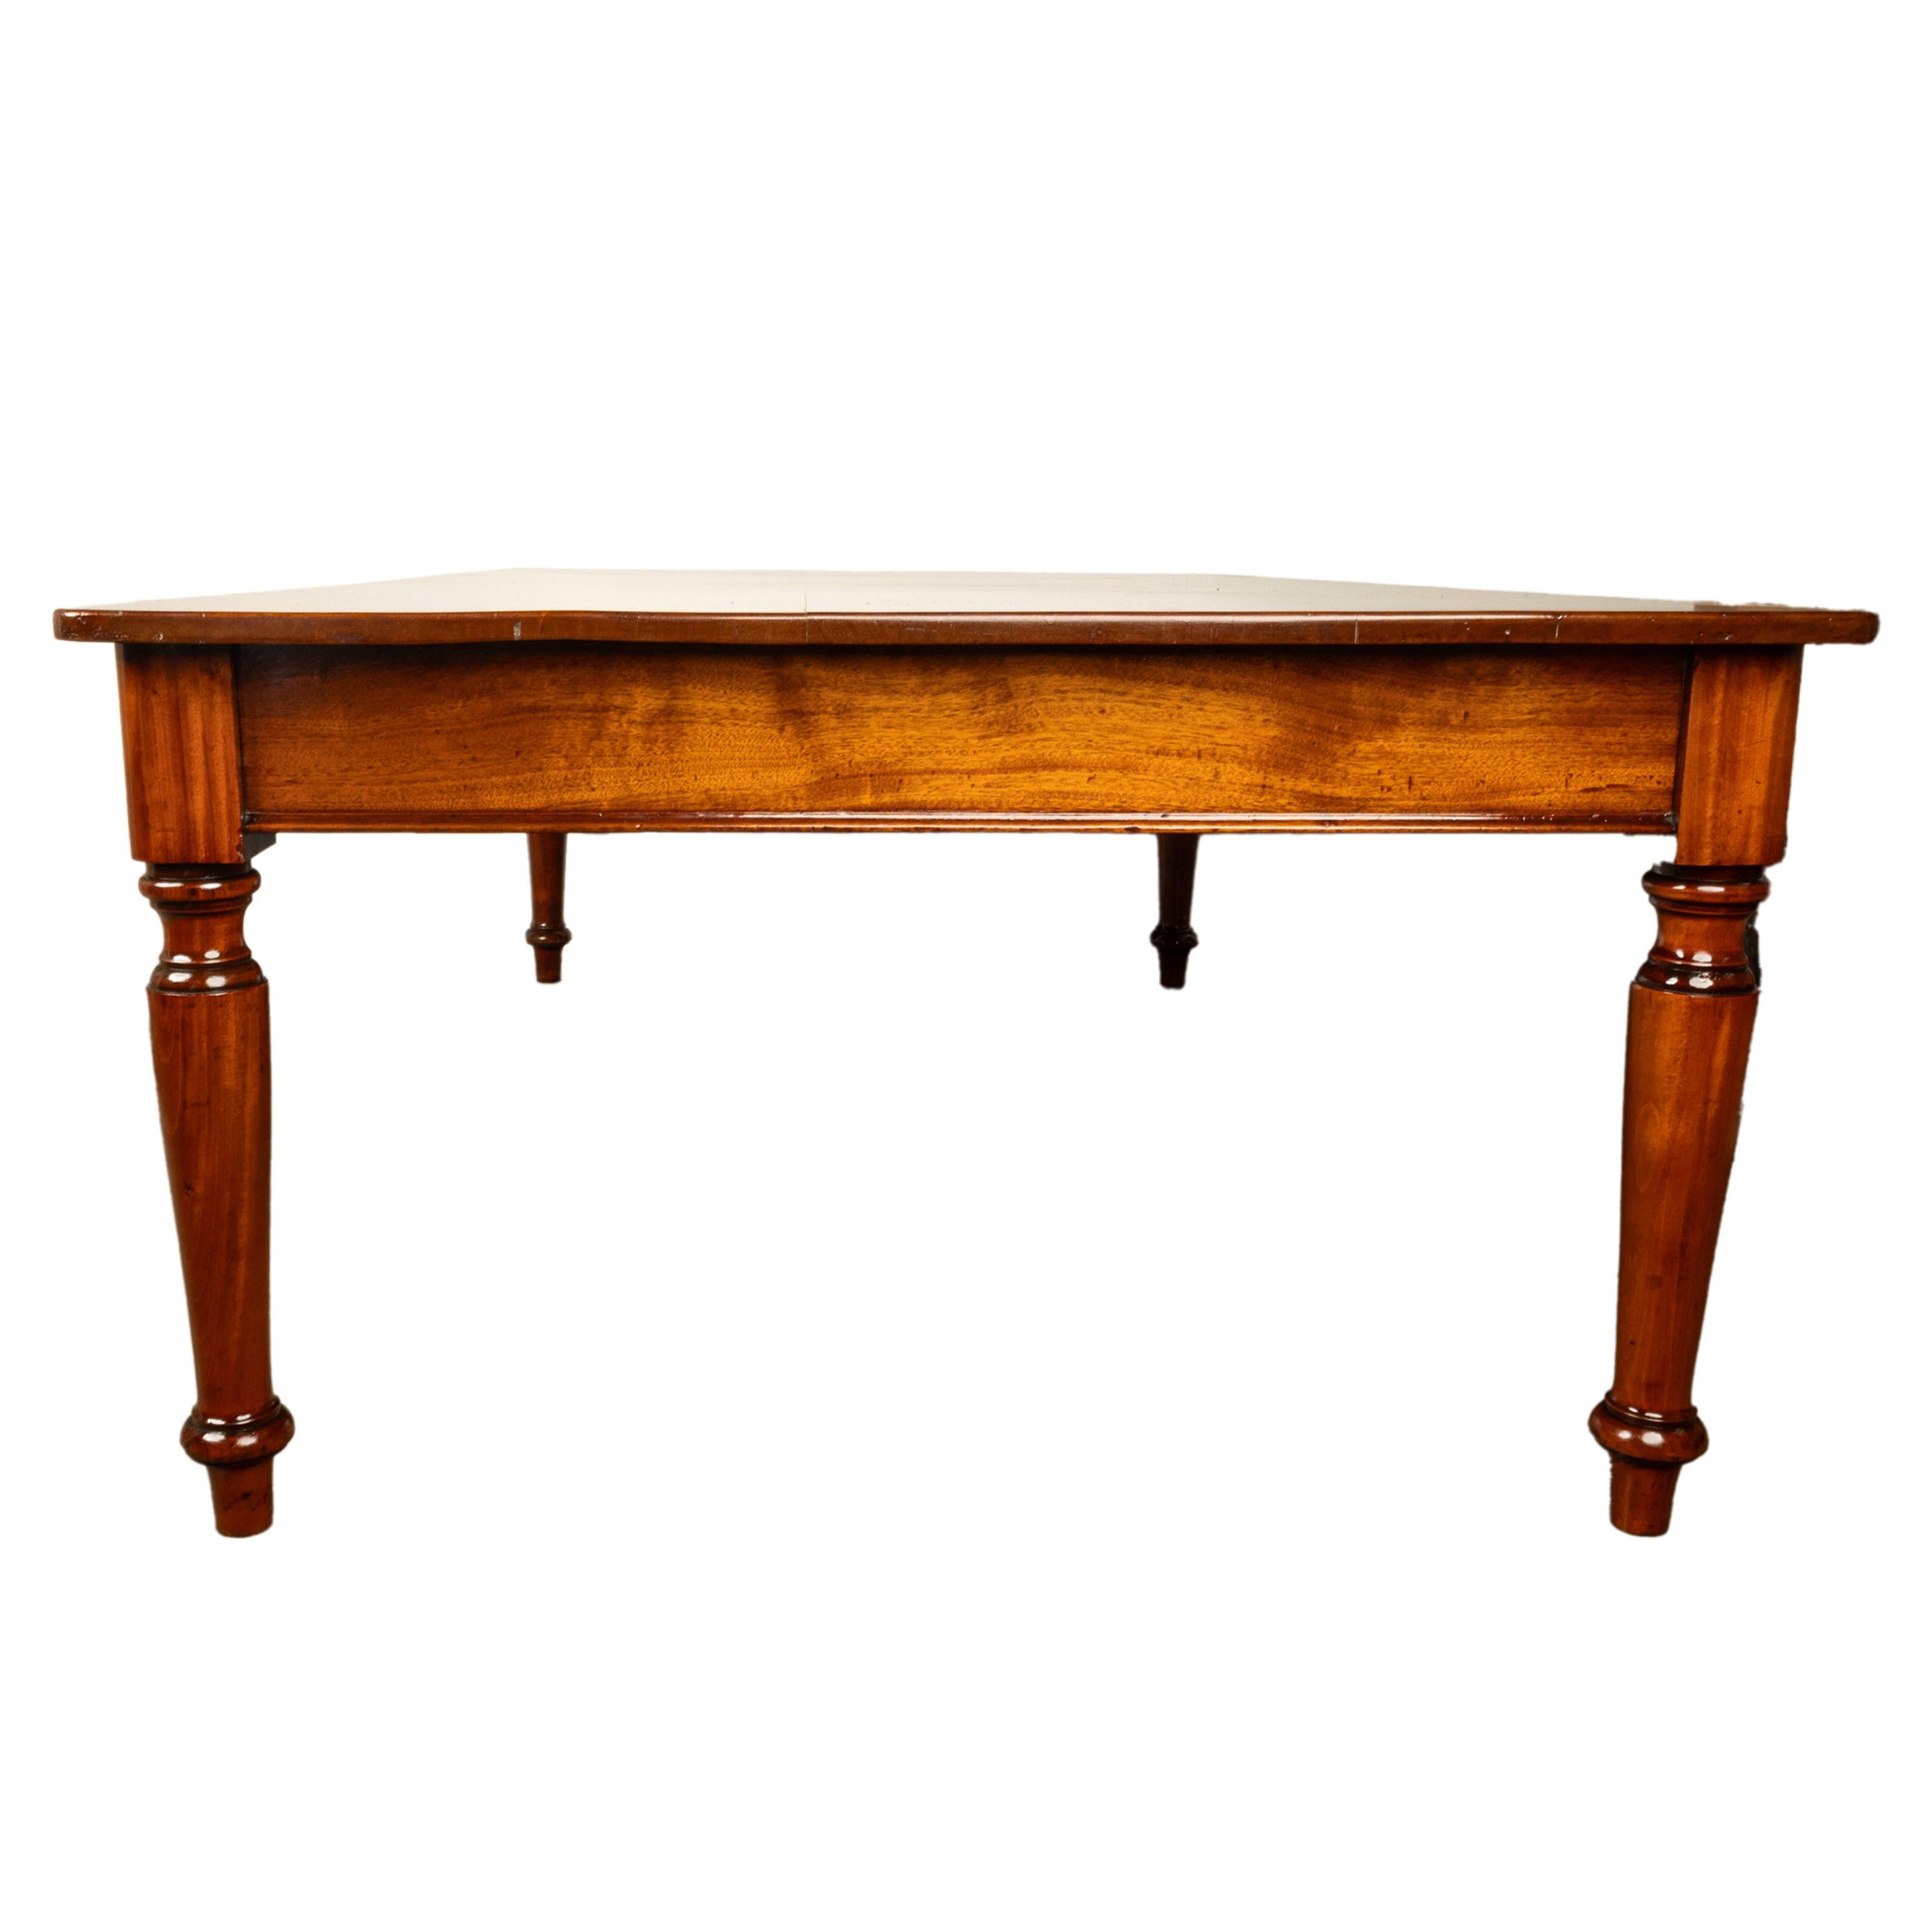 Antique Monumental 19th Century Mahogany Library Conference Dining Table 1860 For Sale 10